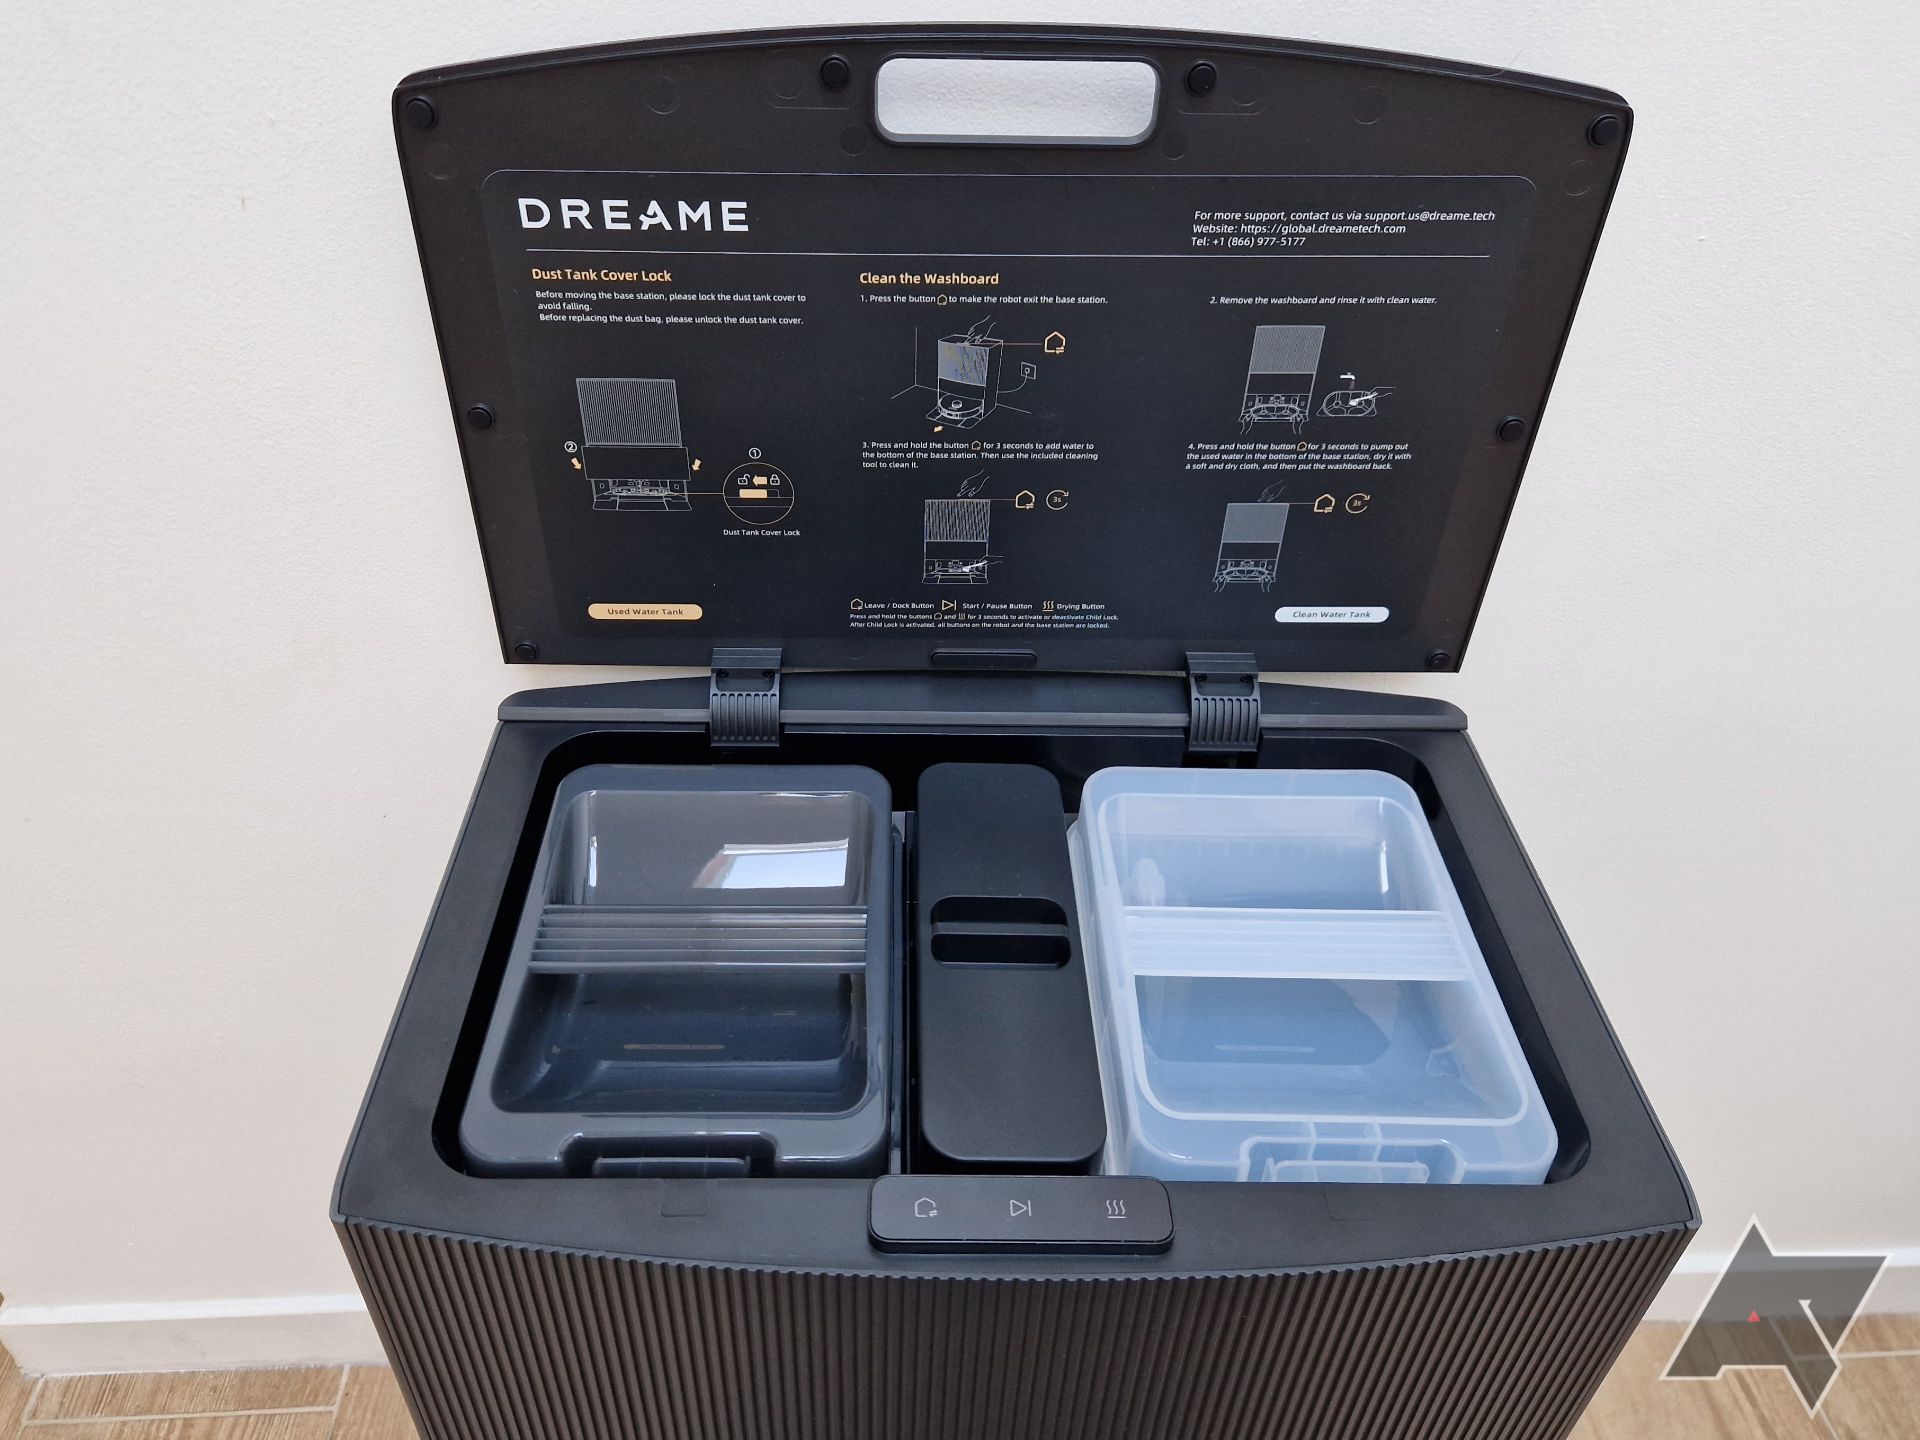 Dreamebot L20 Ultra review: Innovatively overengineered